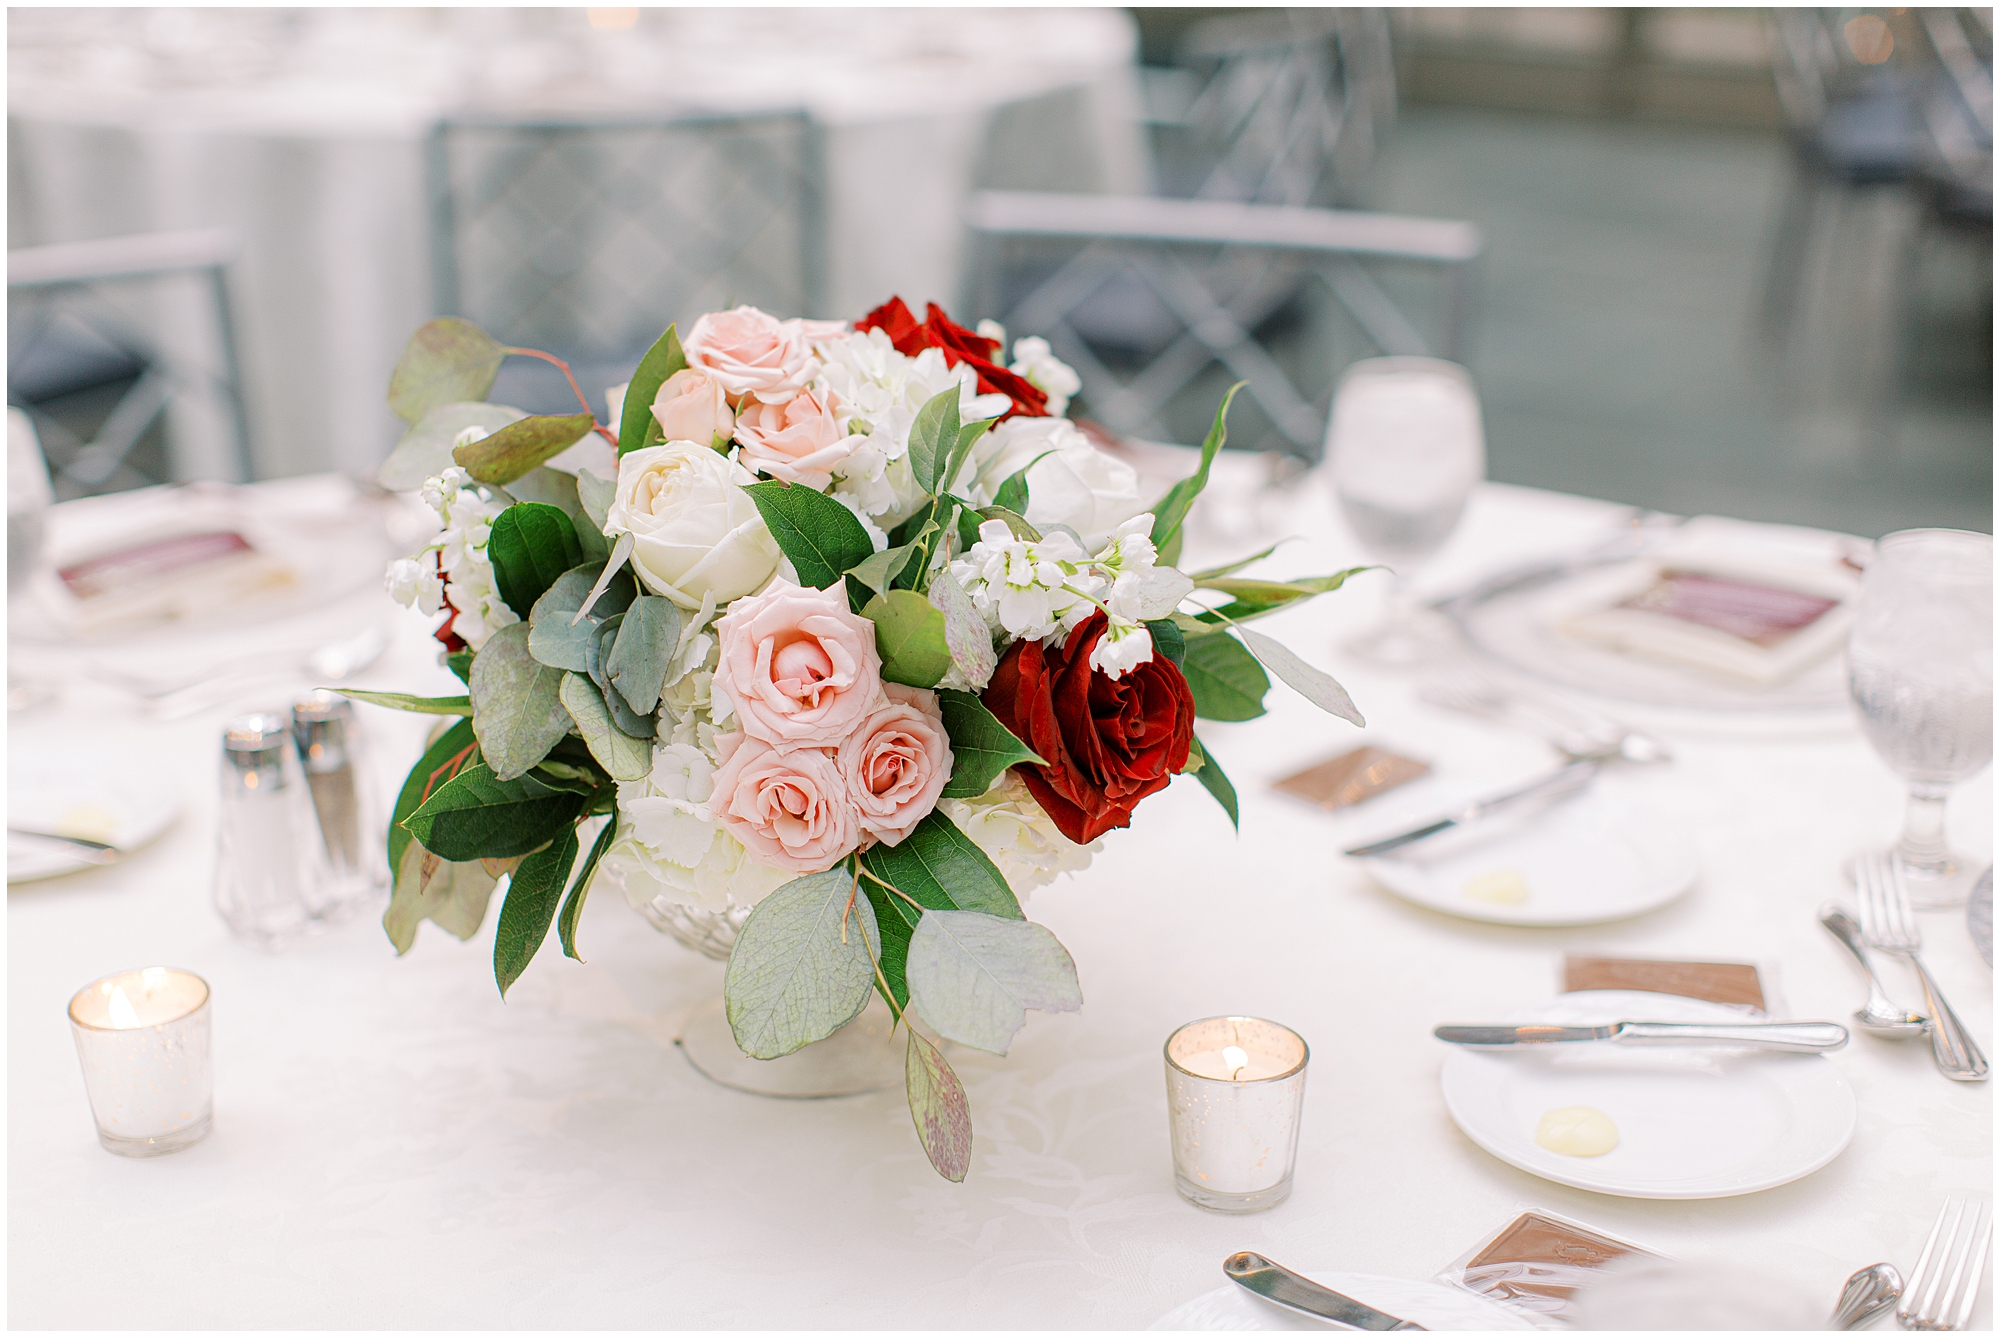 wedding centerpieces with red roses